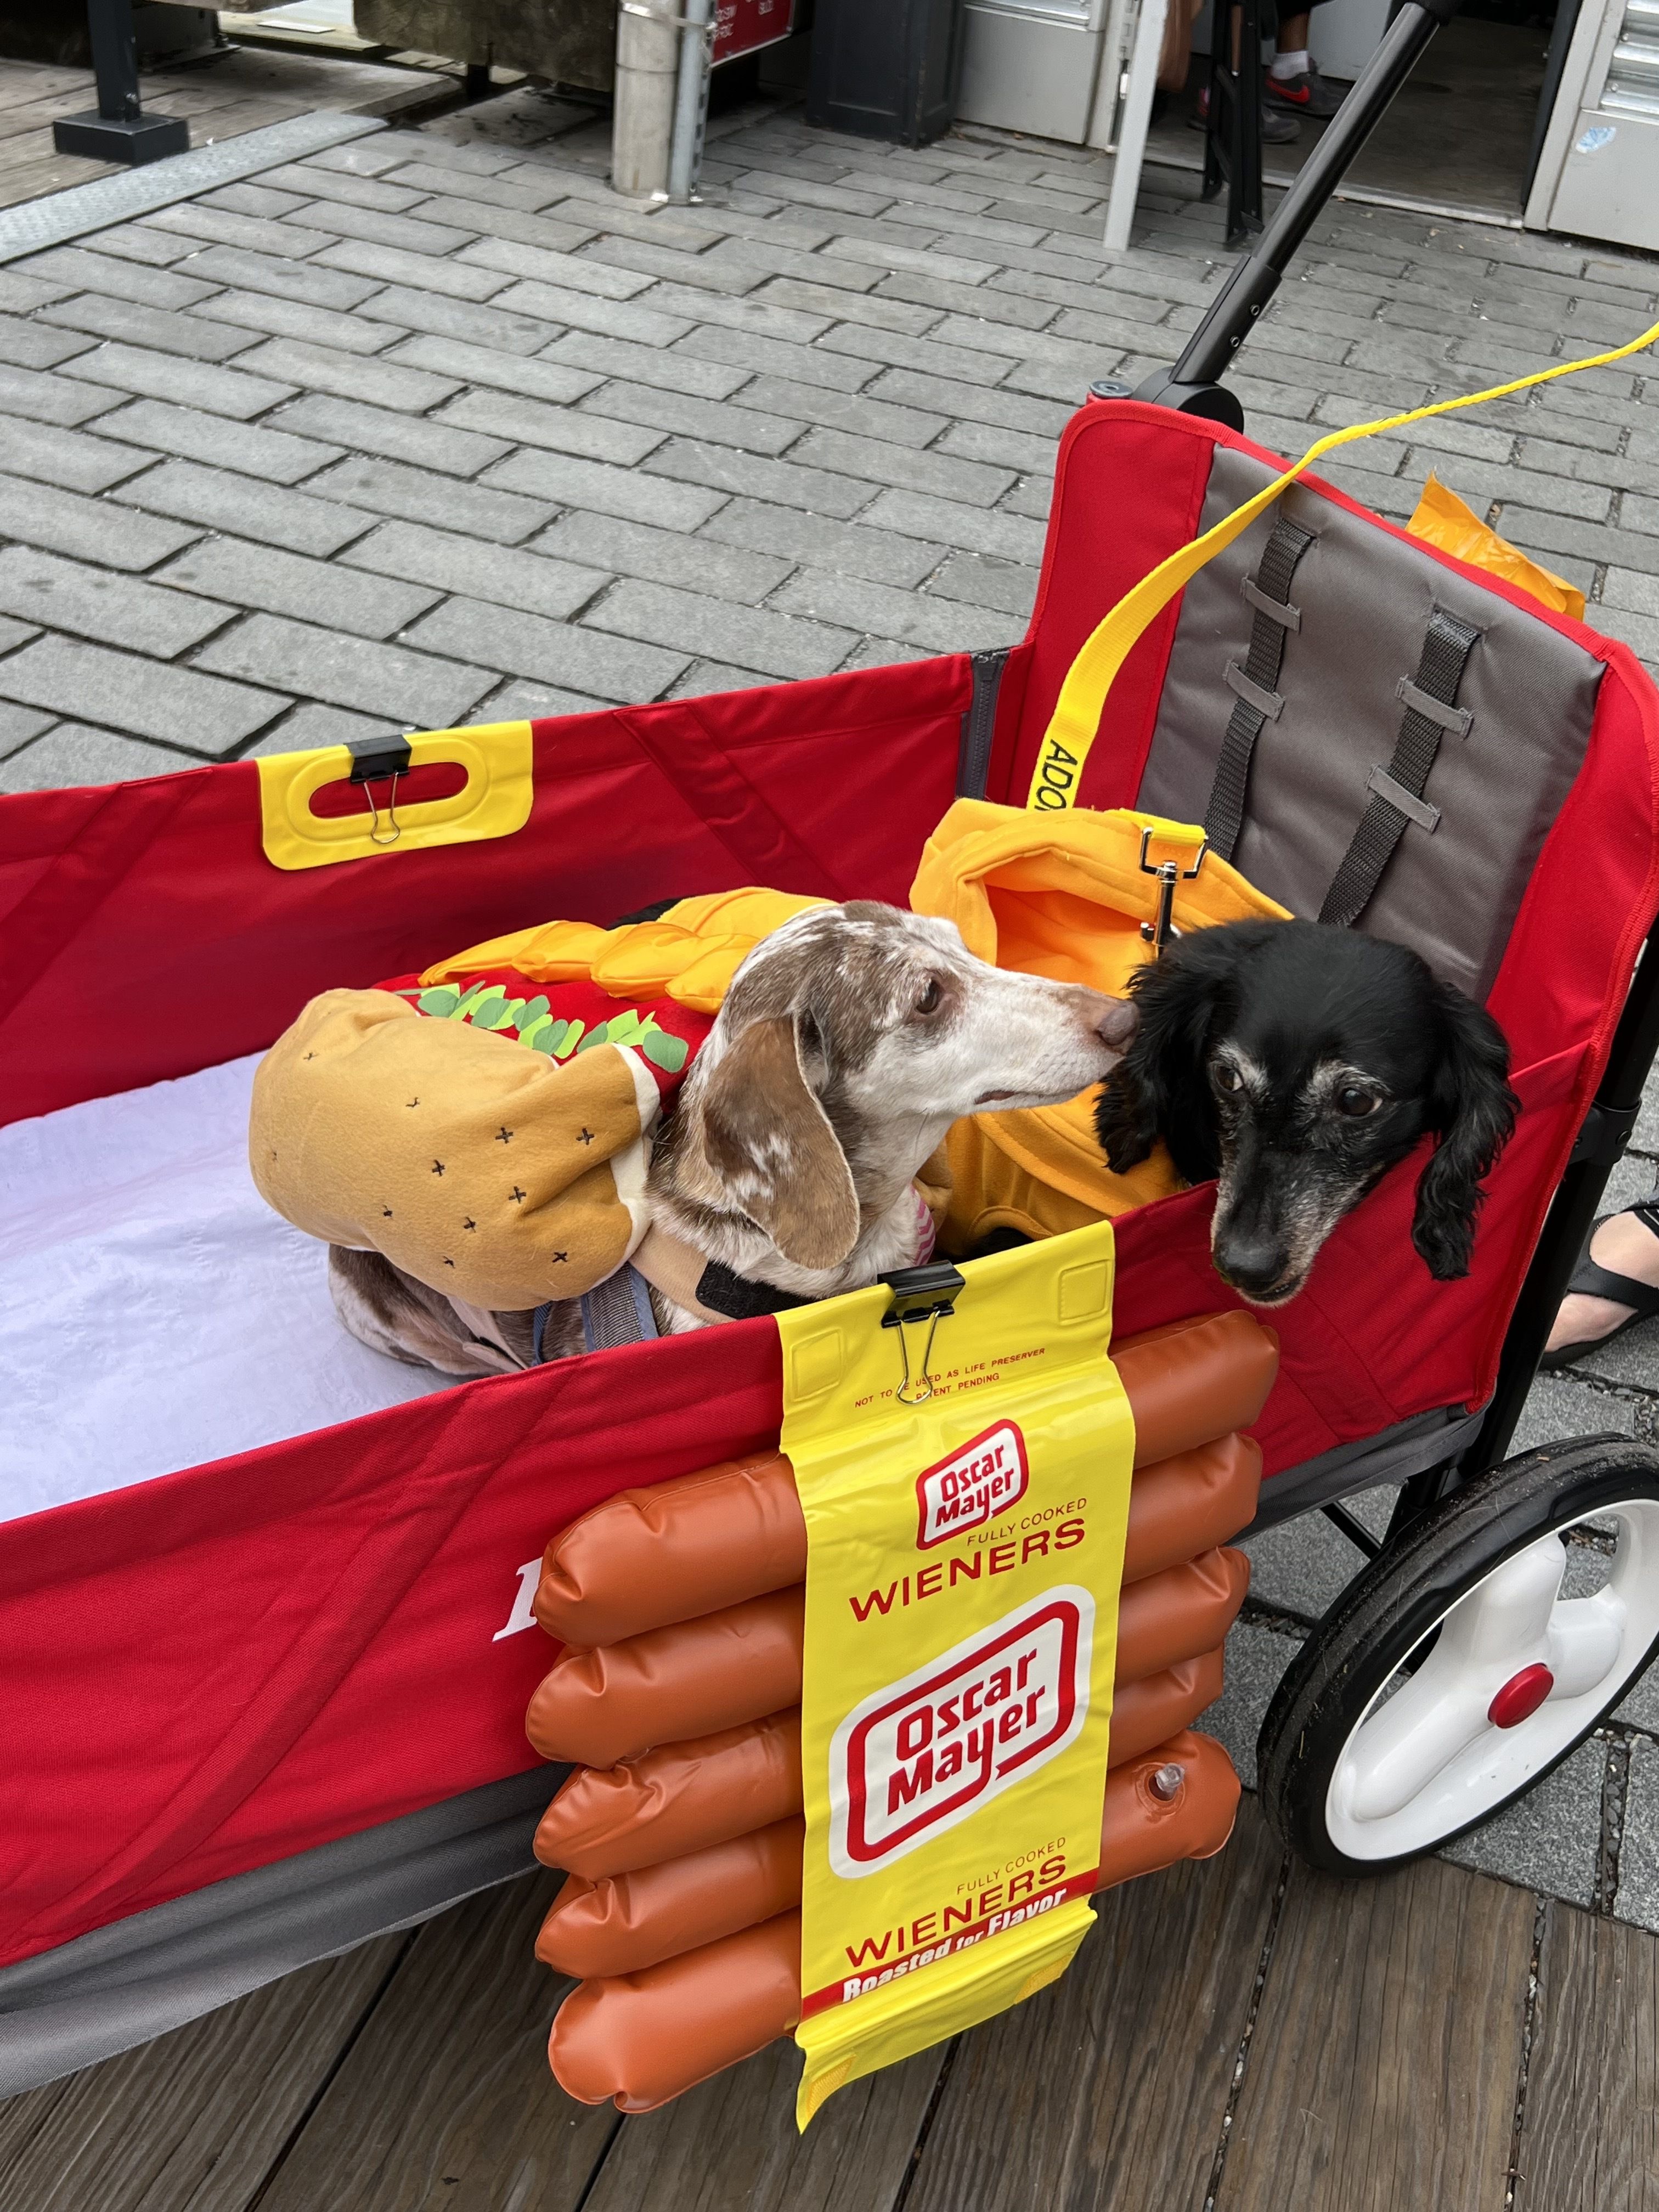 Two Dachsunds dressed up in hot dog costumes and sitting in a red wagon with Oscar Meyer wiener banner on it.